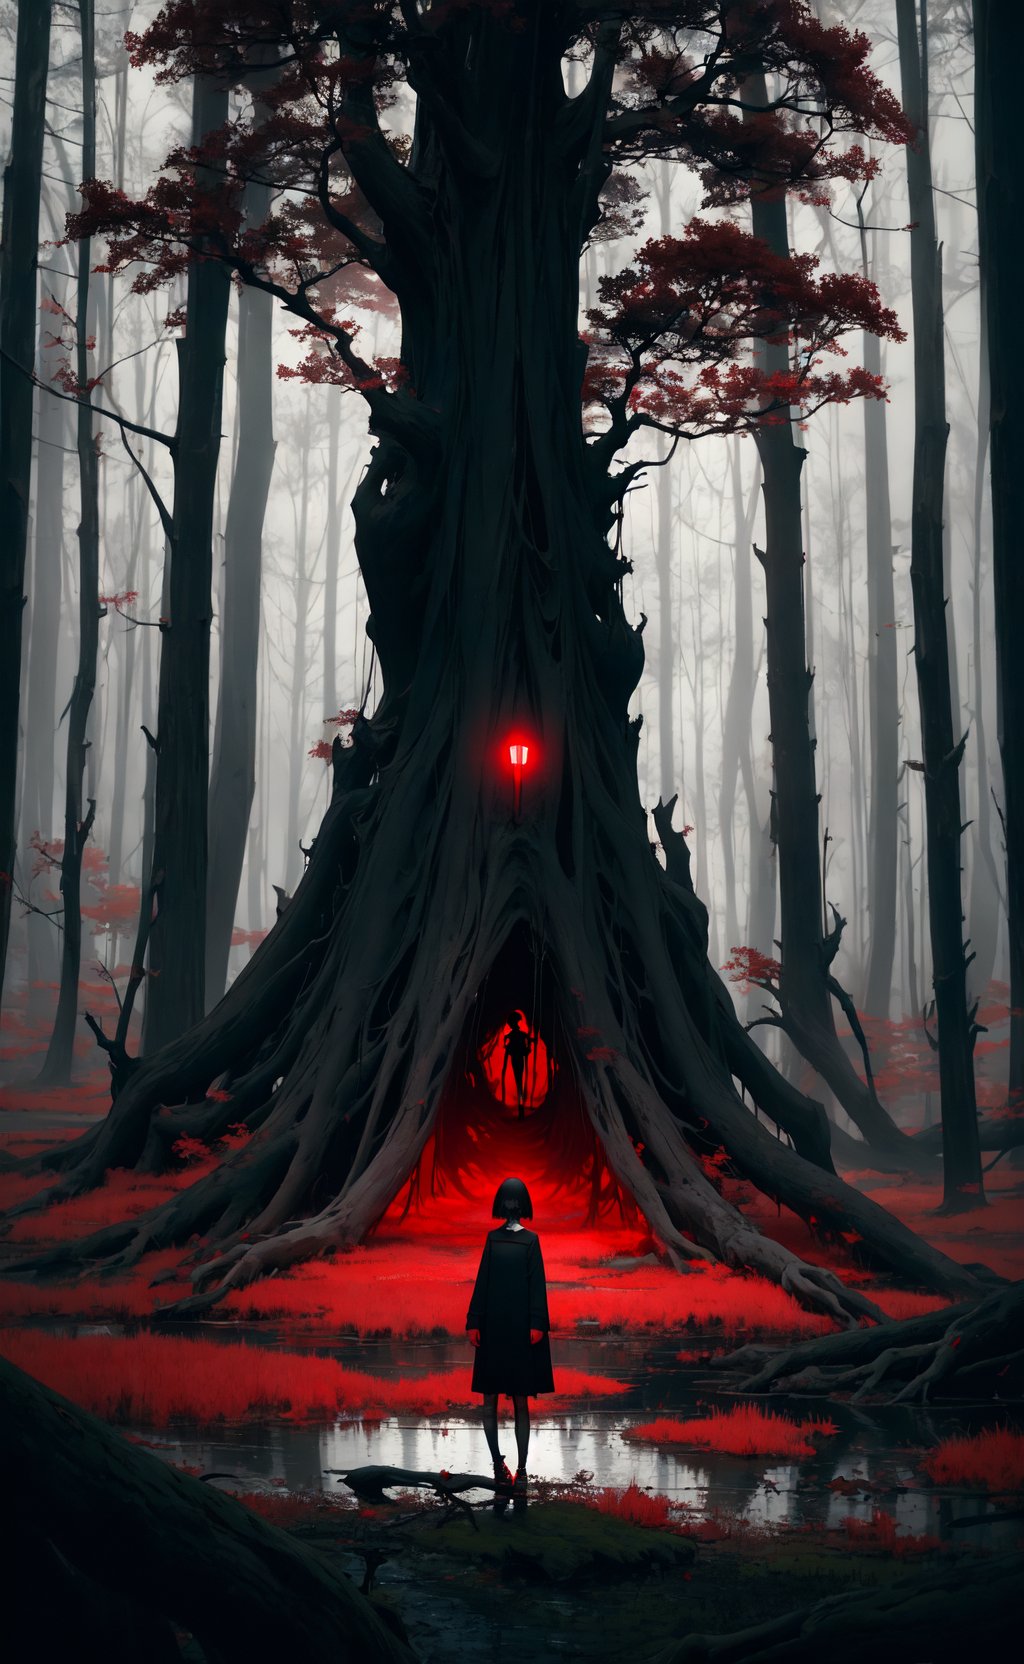 masterpiece, best quality, girl standing under the dead tree, black and red palette, eerie